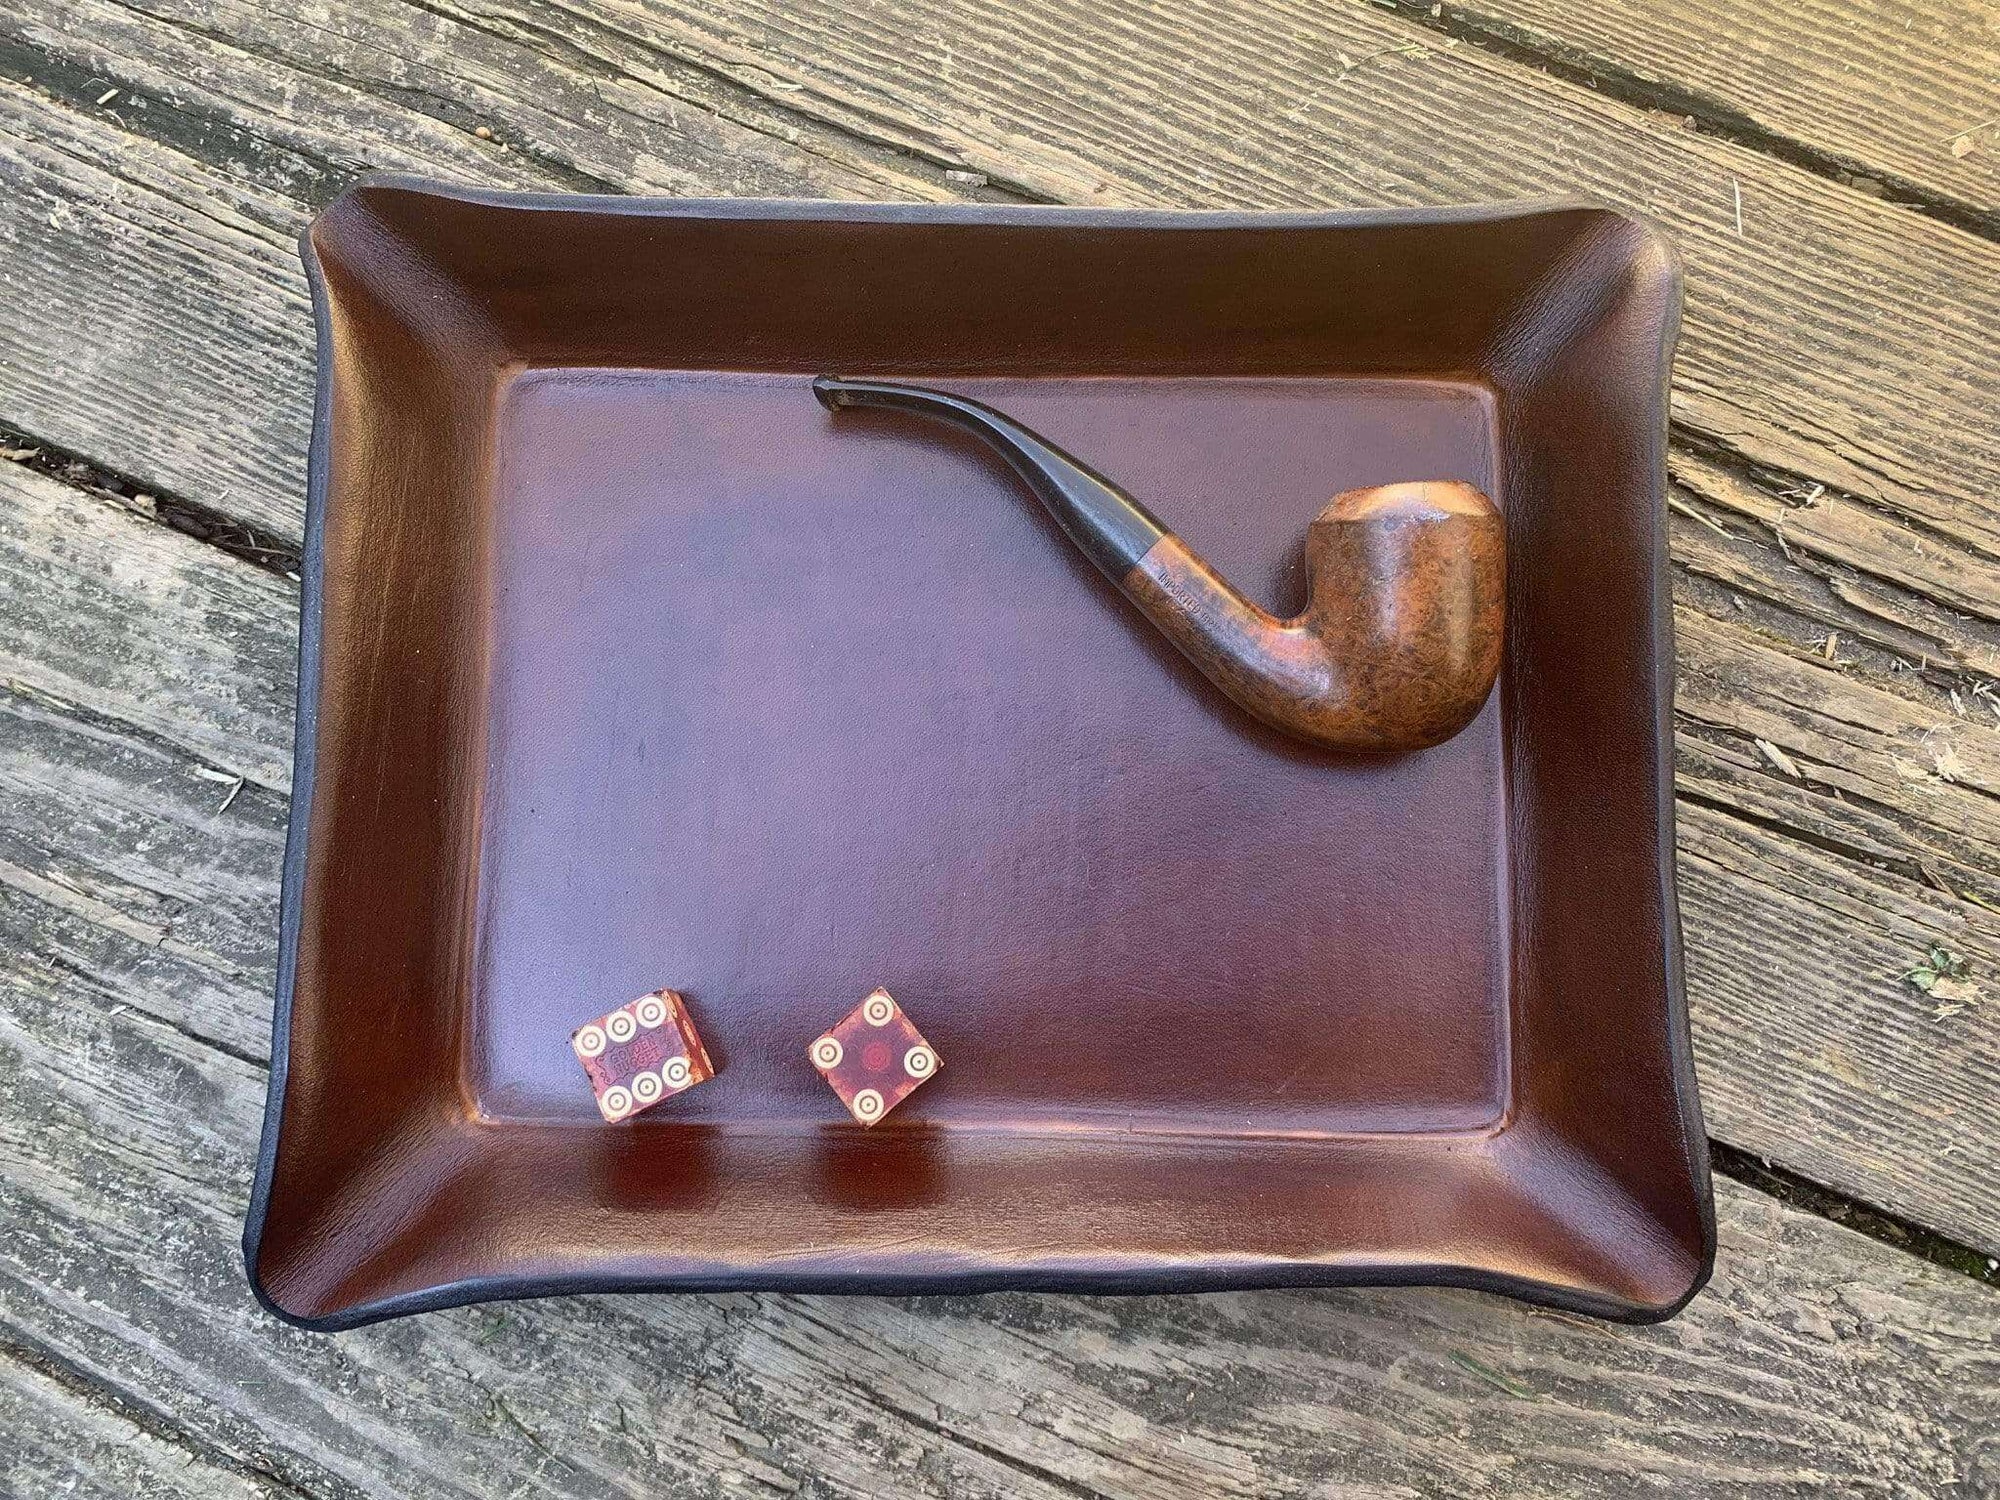 Handcrafted leather valet for pipes, dice, and EDC.